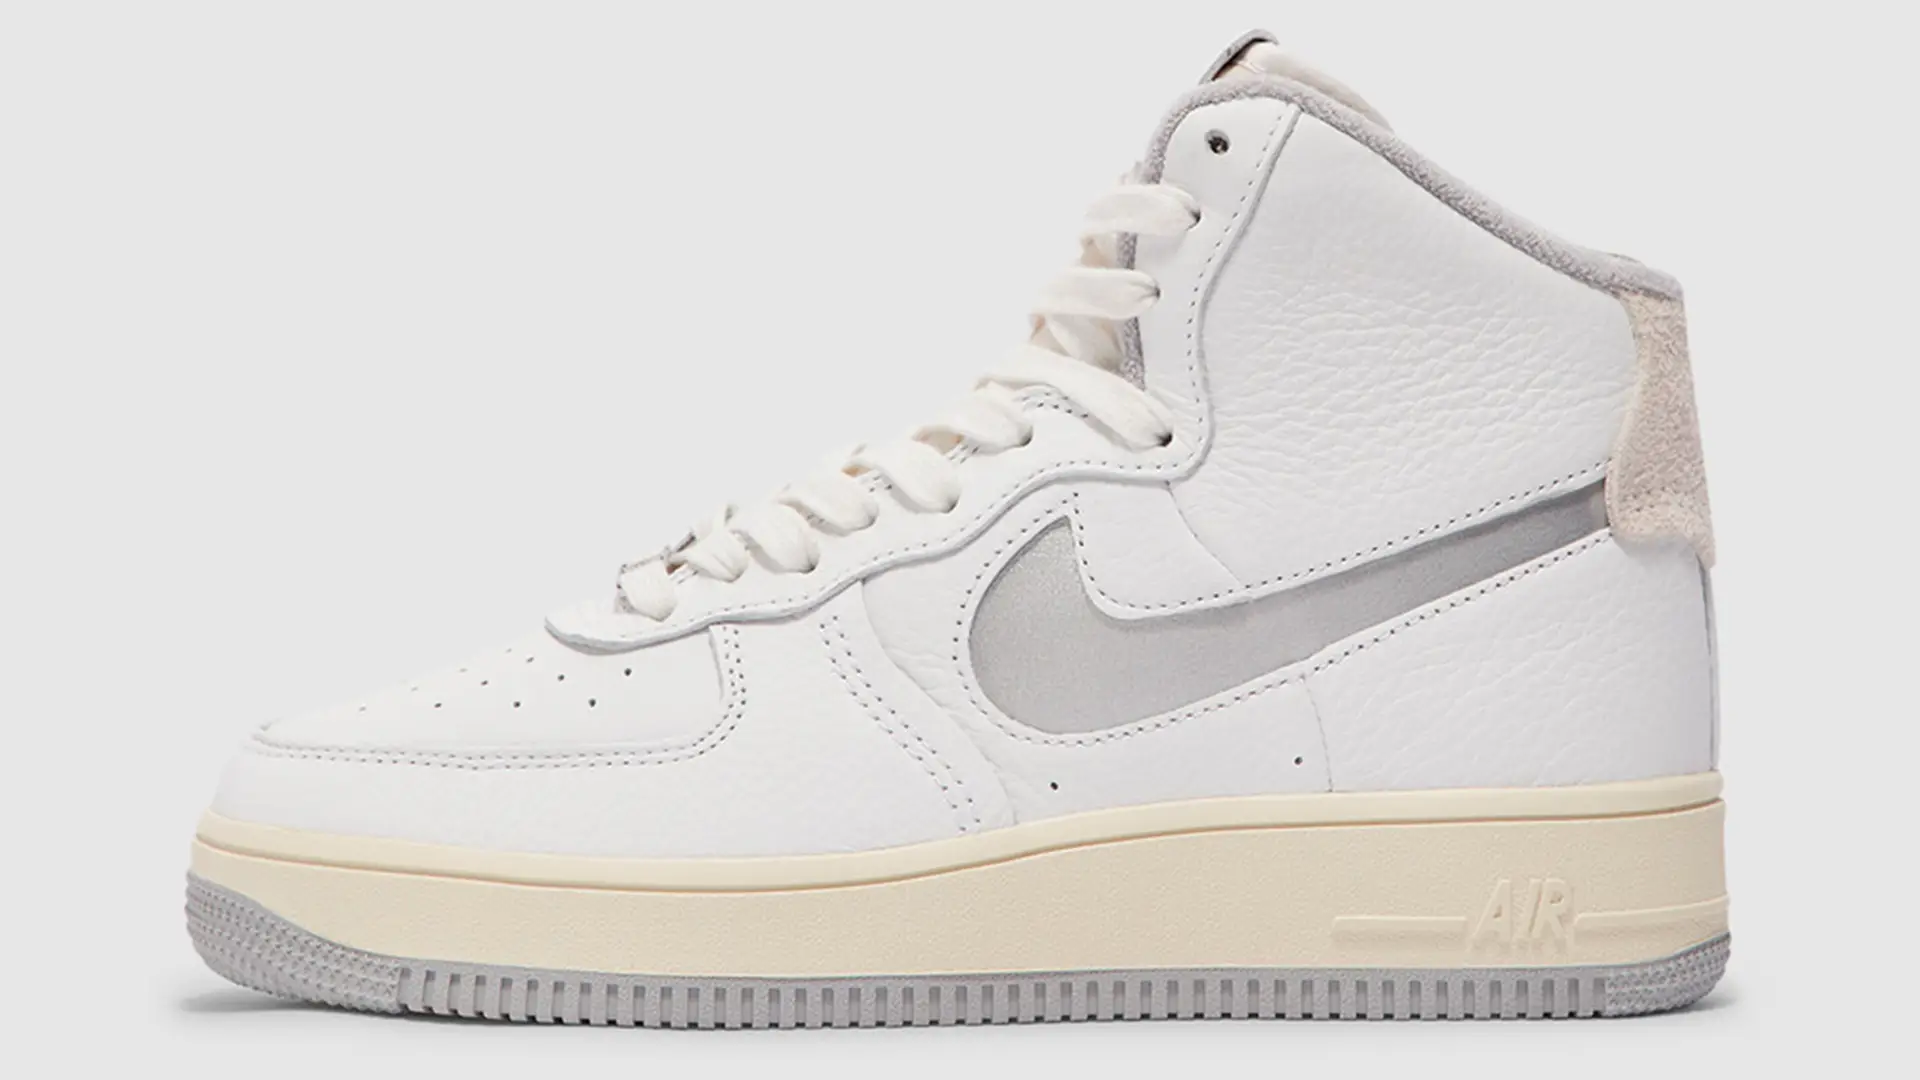 Cop Sporty & Rich, Aries and Nike Air Force 1s for 50% Off at ...